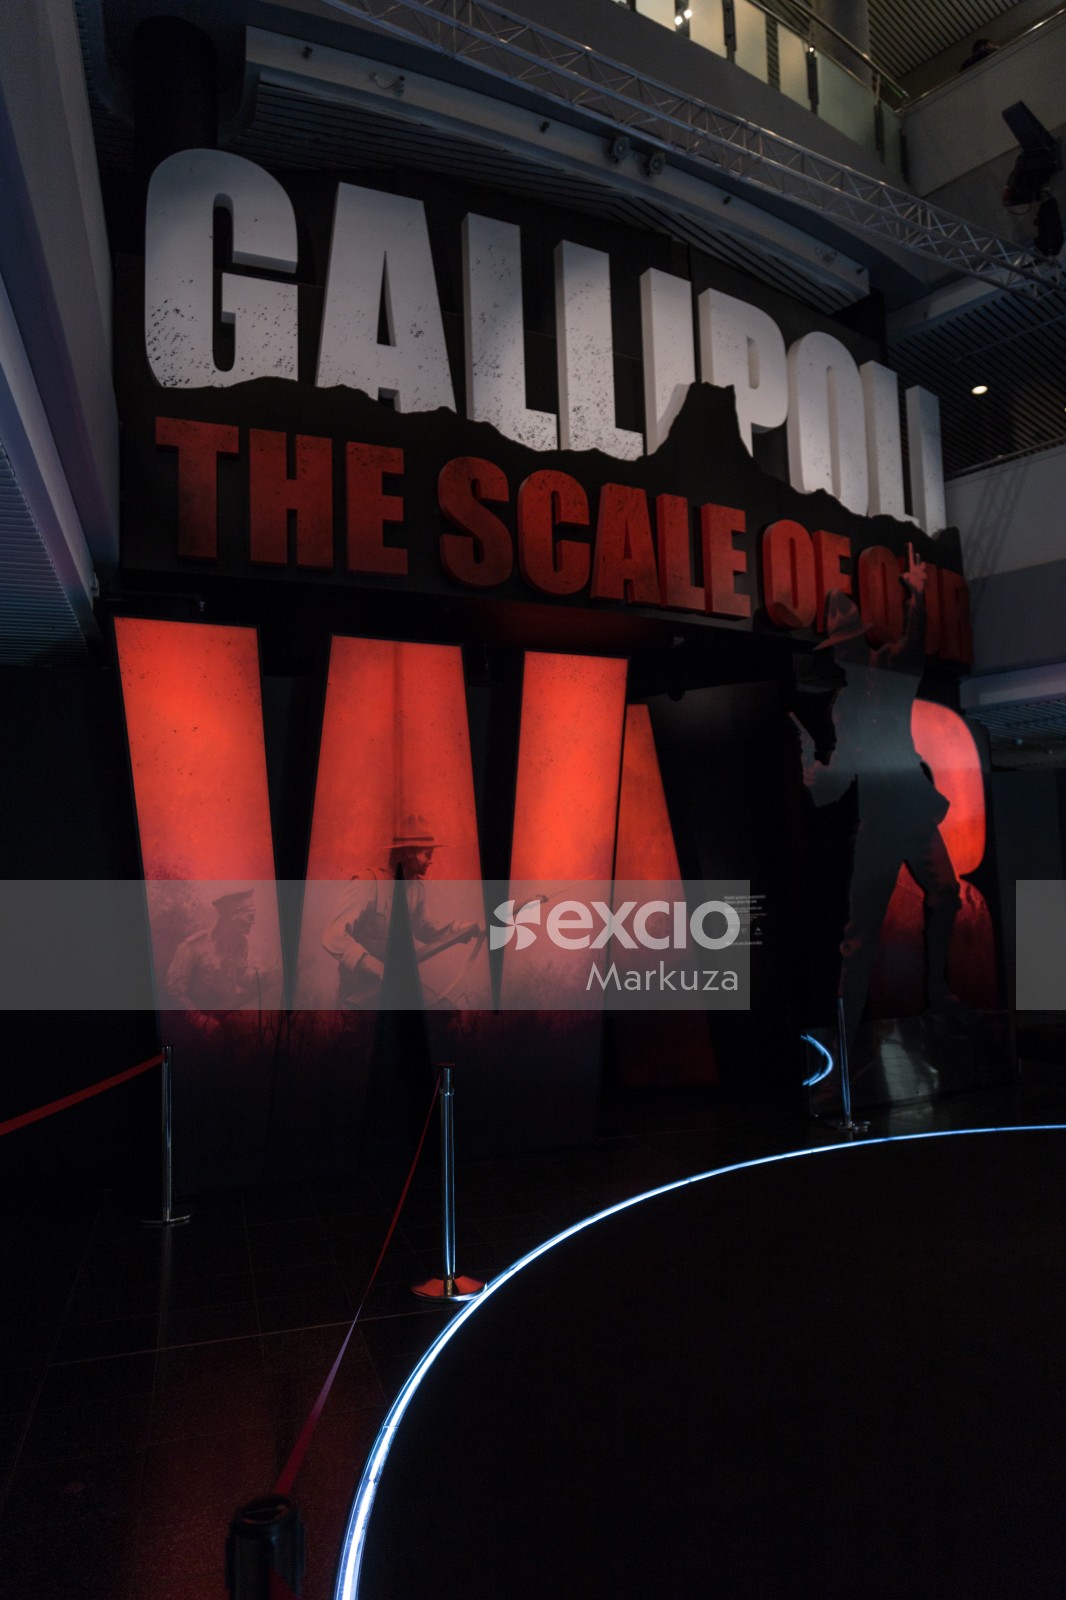 "Gallipolli The Scale of Our War" - Te Papa